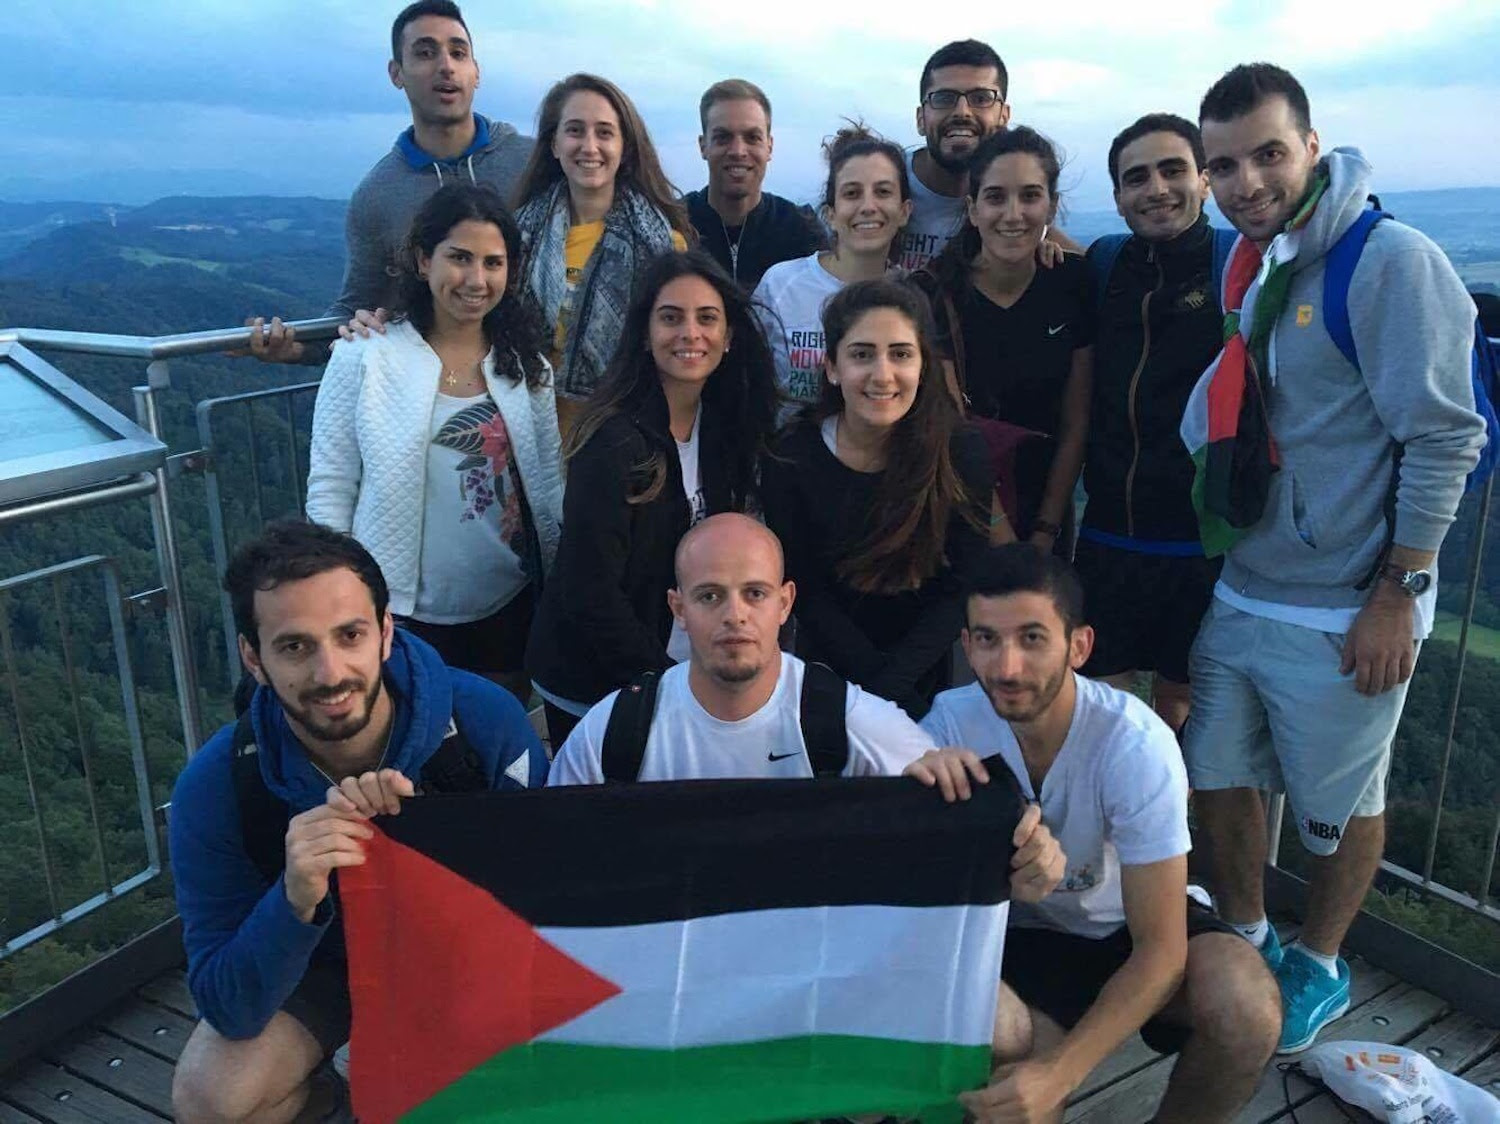 Palestinian marathoners from Right to Movement